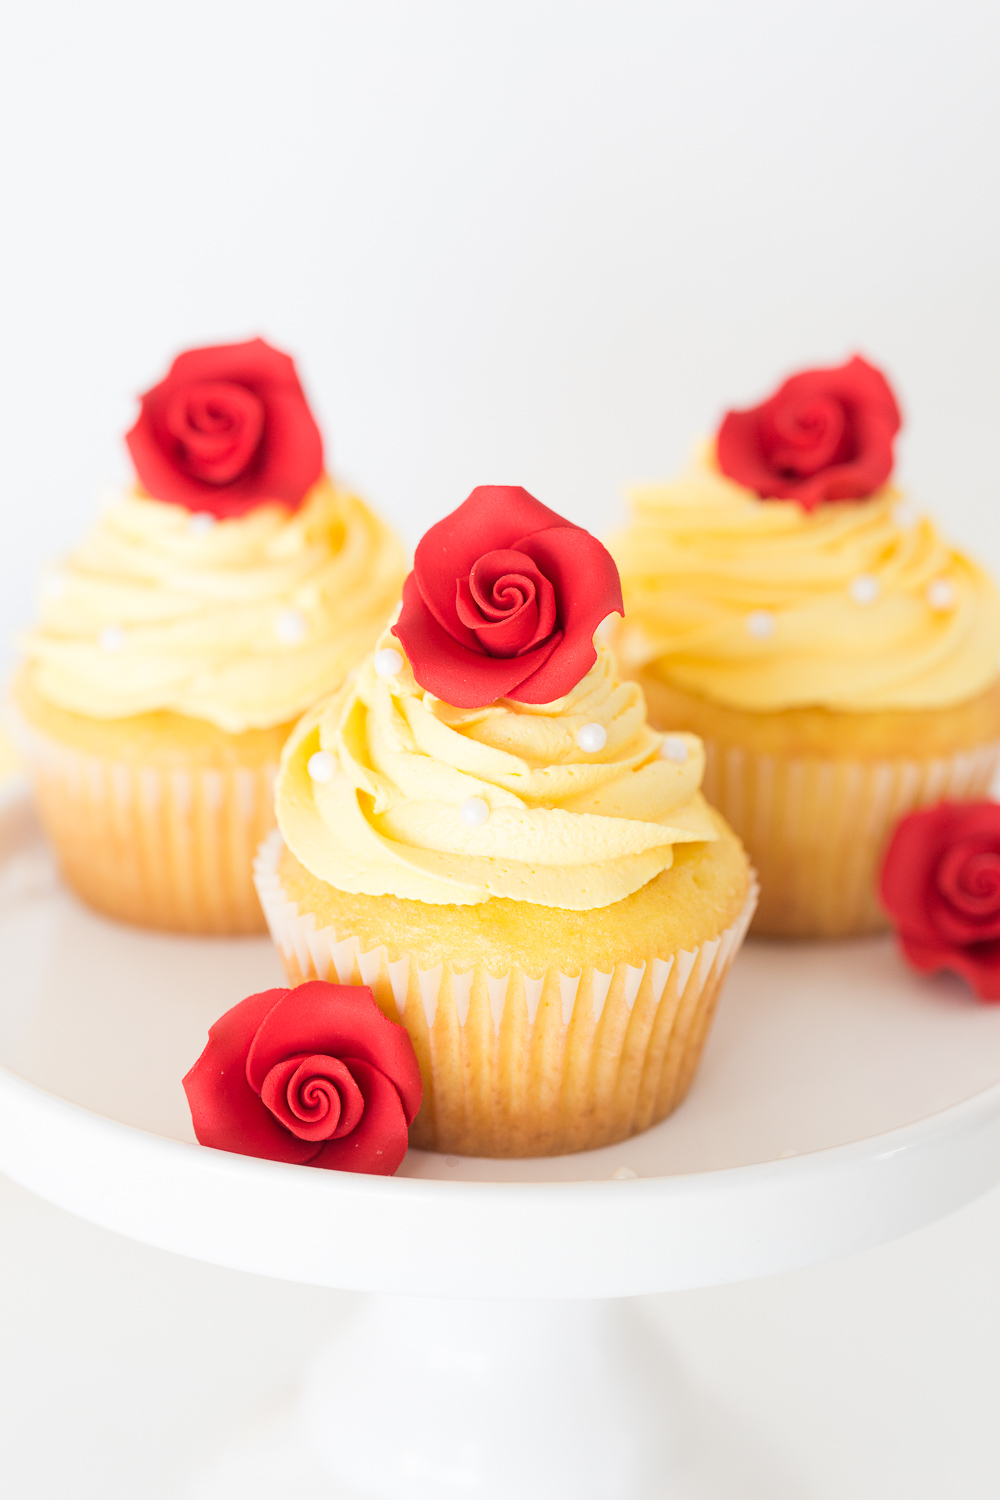 Belle Cupcakes | Beauty and the Beast | Beauty and the Beast Treats | Cupcakes | Disney Treats | Princess Party